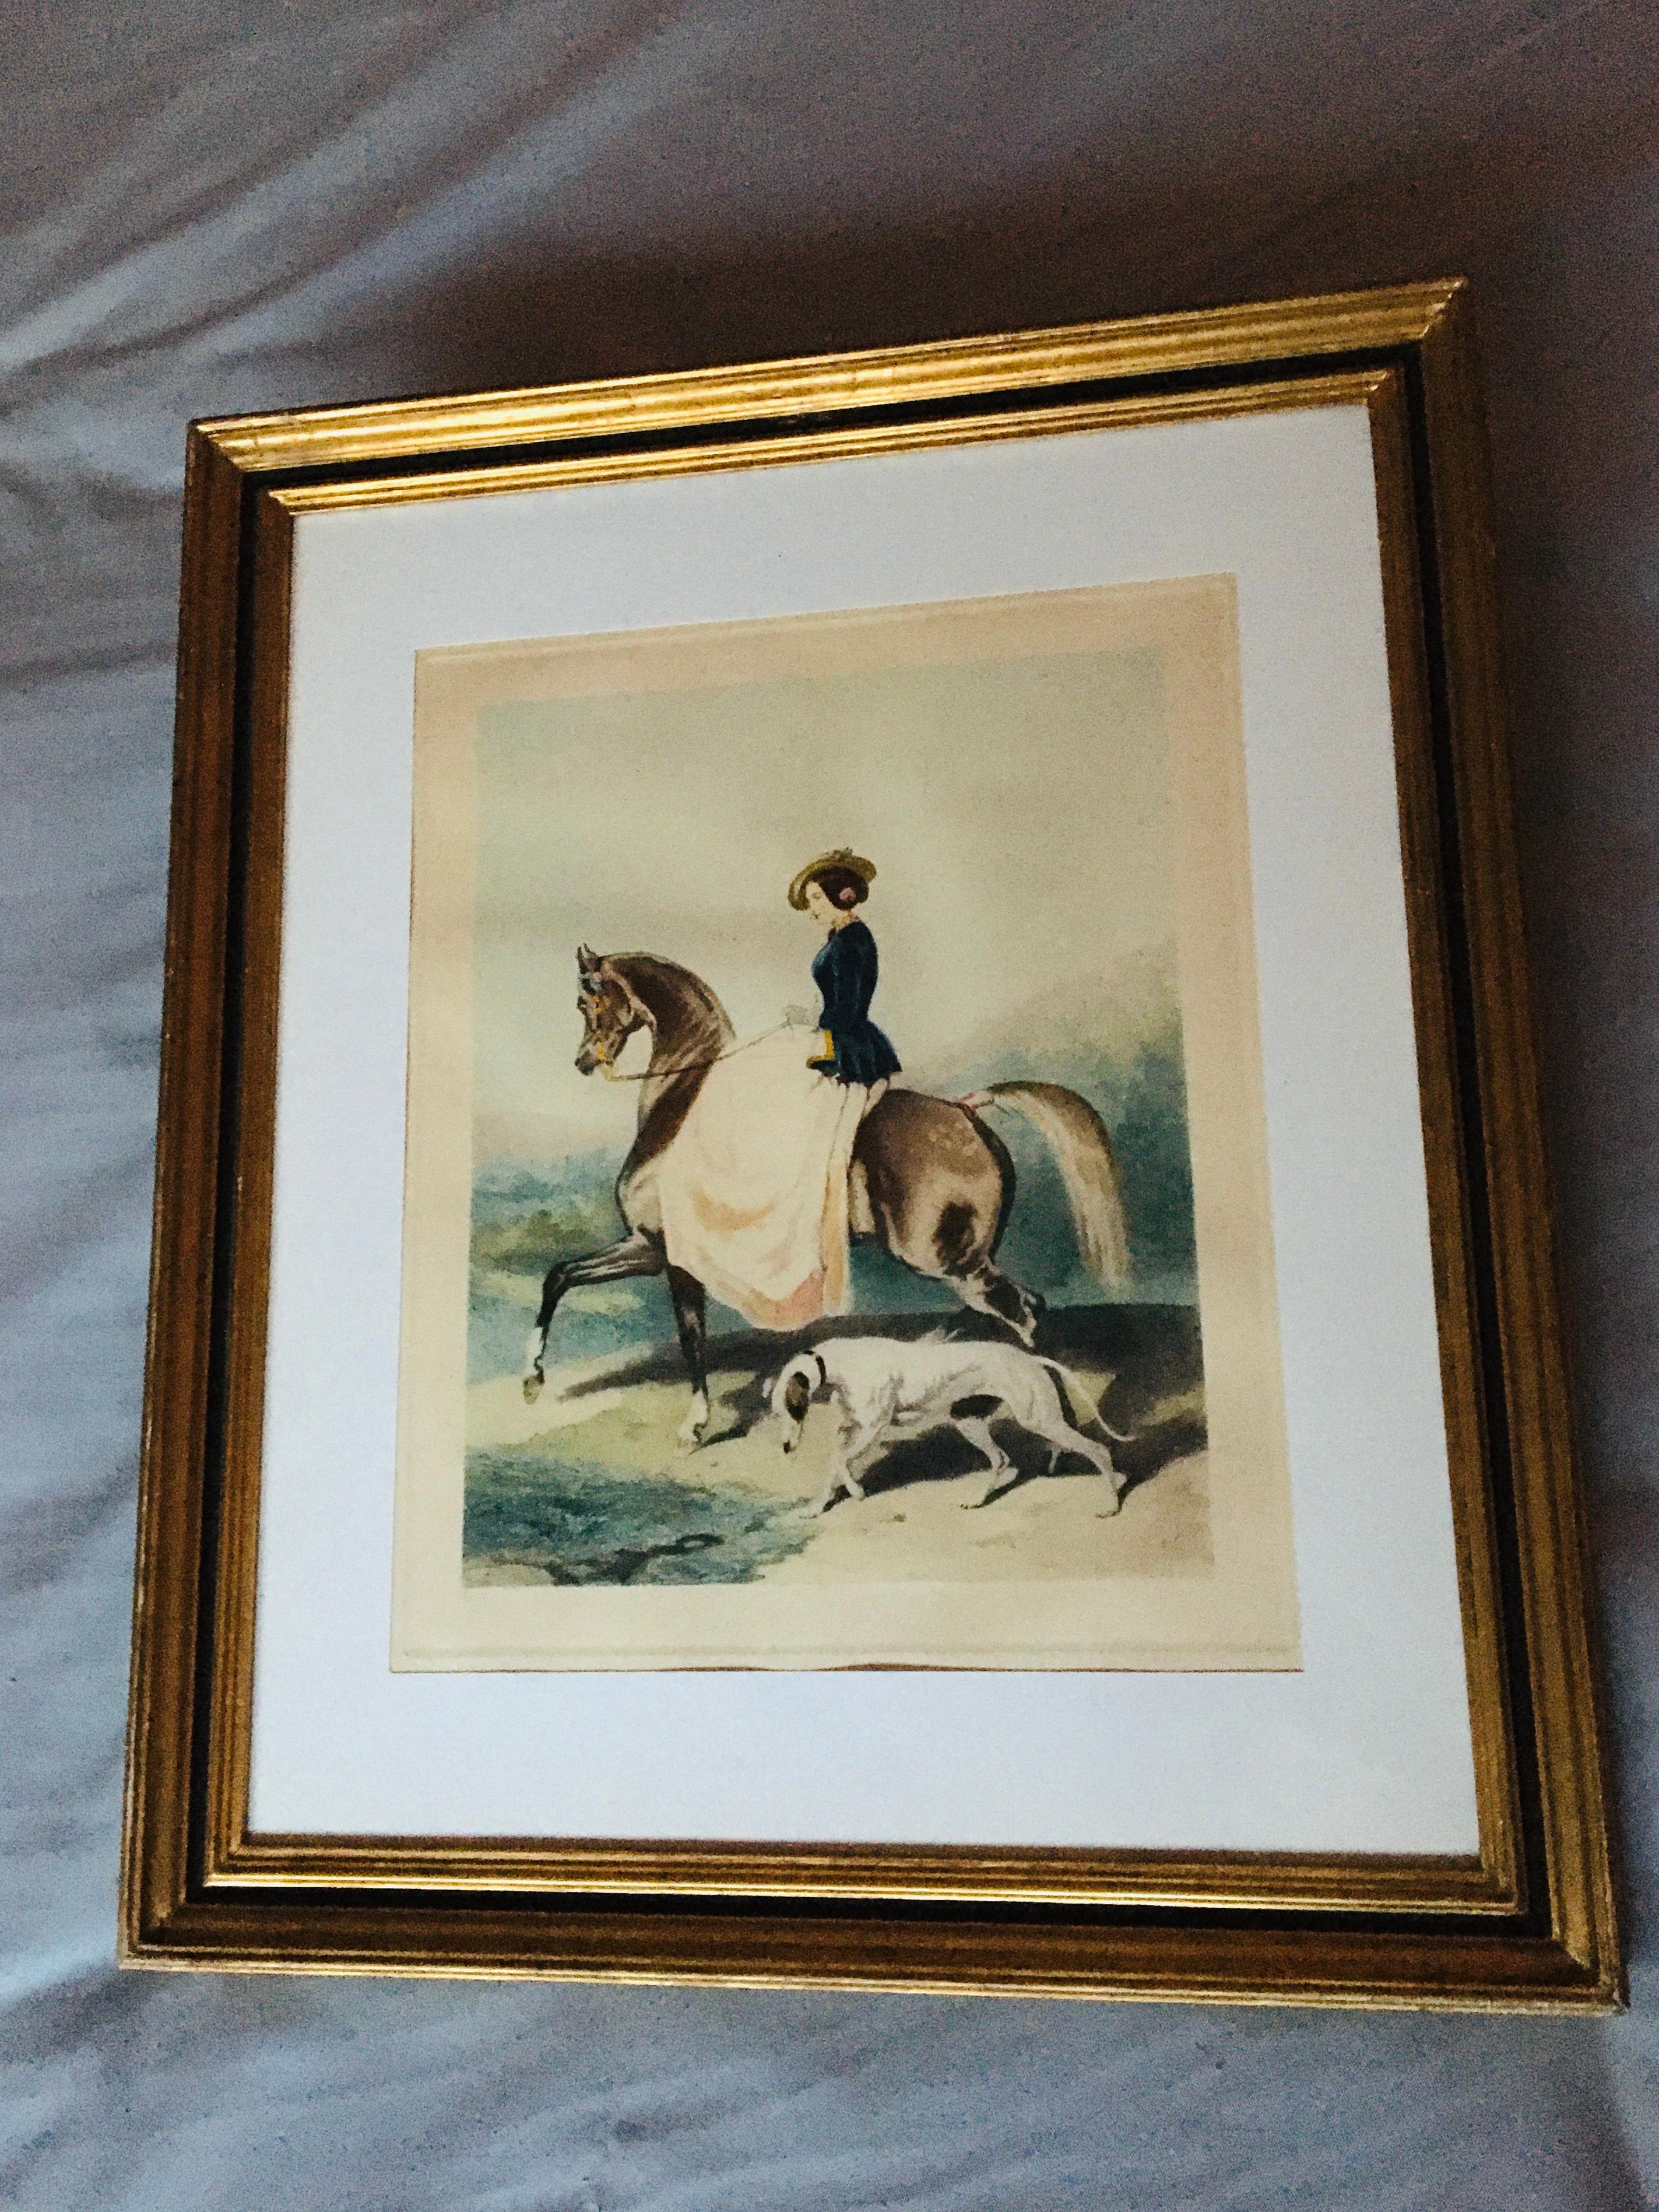 Alfred de Dreux Animal Print - The Horsewoman and her Greyhound